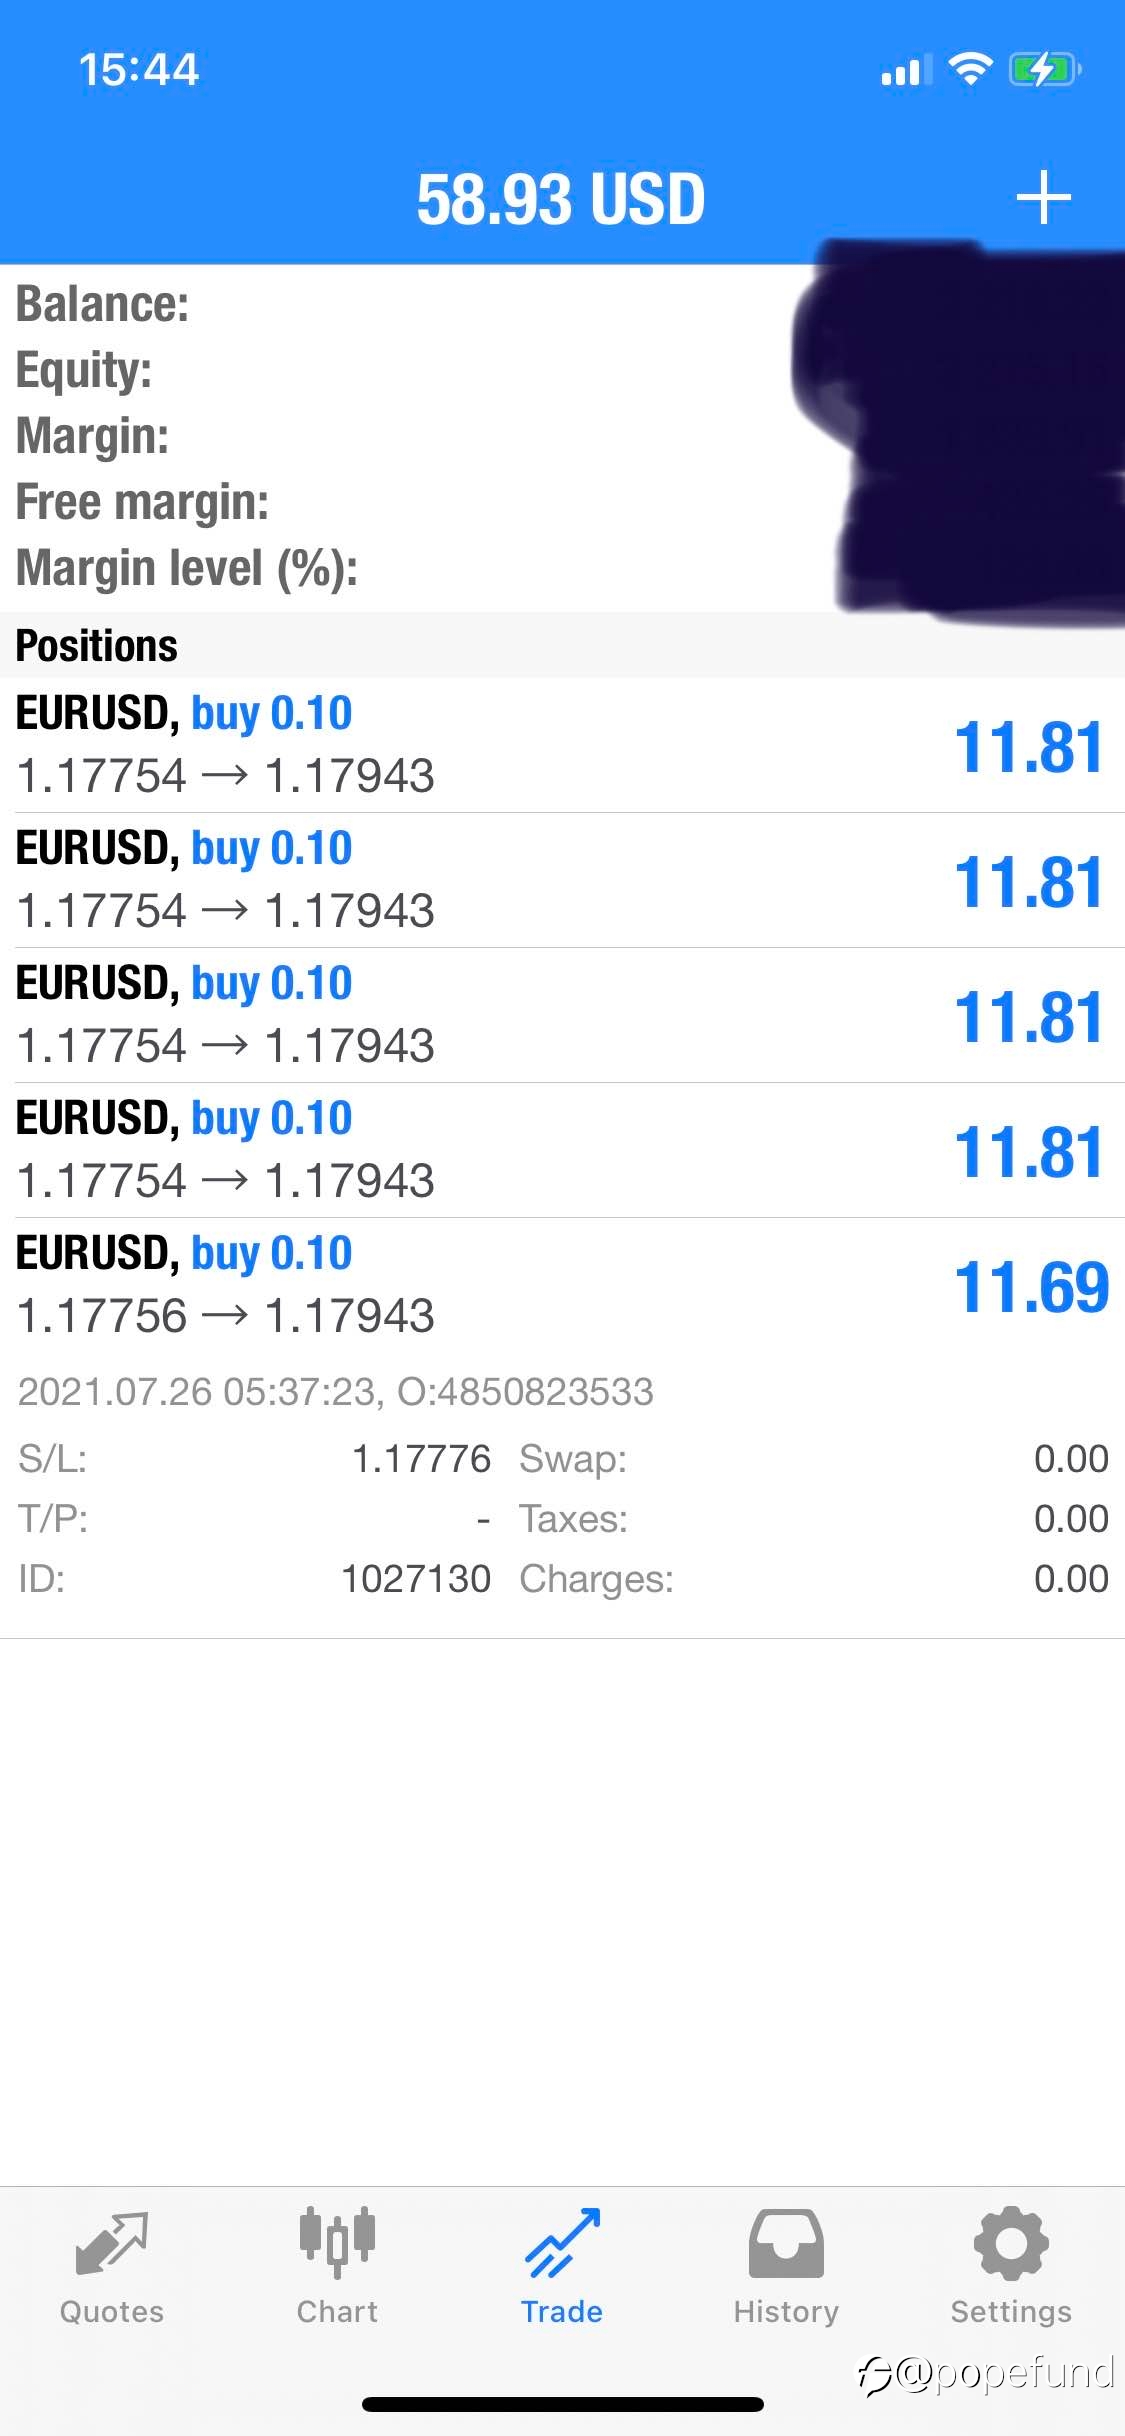 What a busy Monday! EURO Longs entries established …[all stopped out for 2 pips🤪]